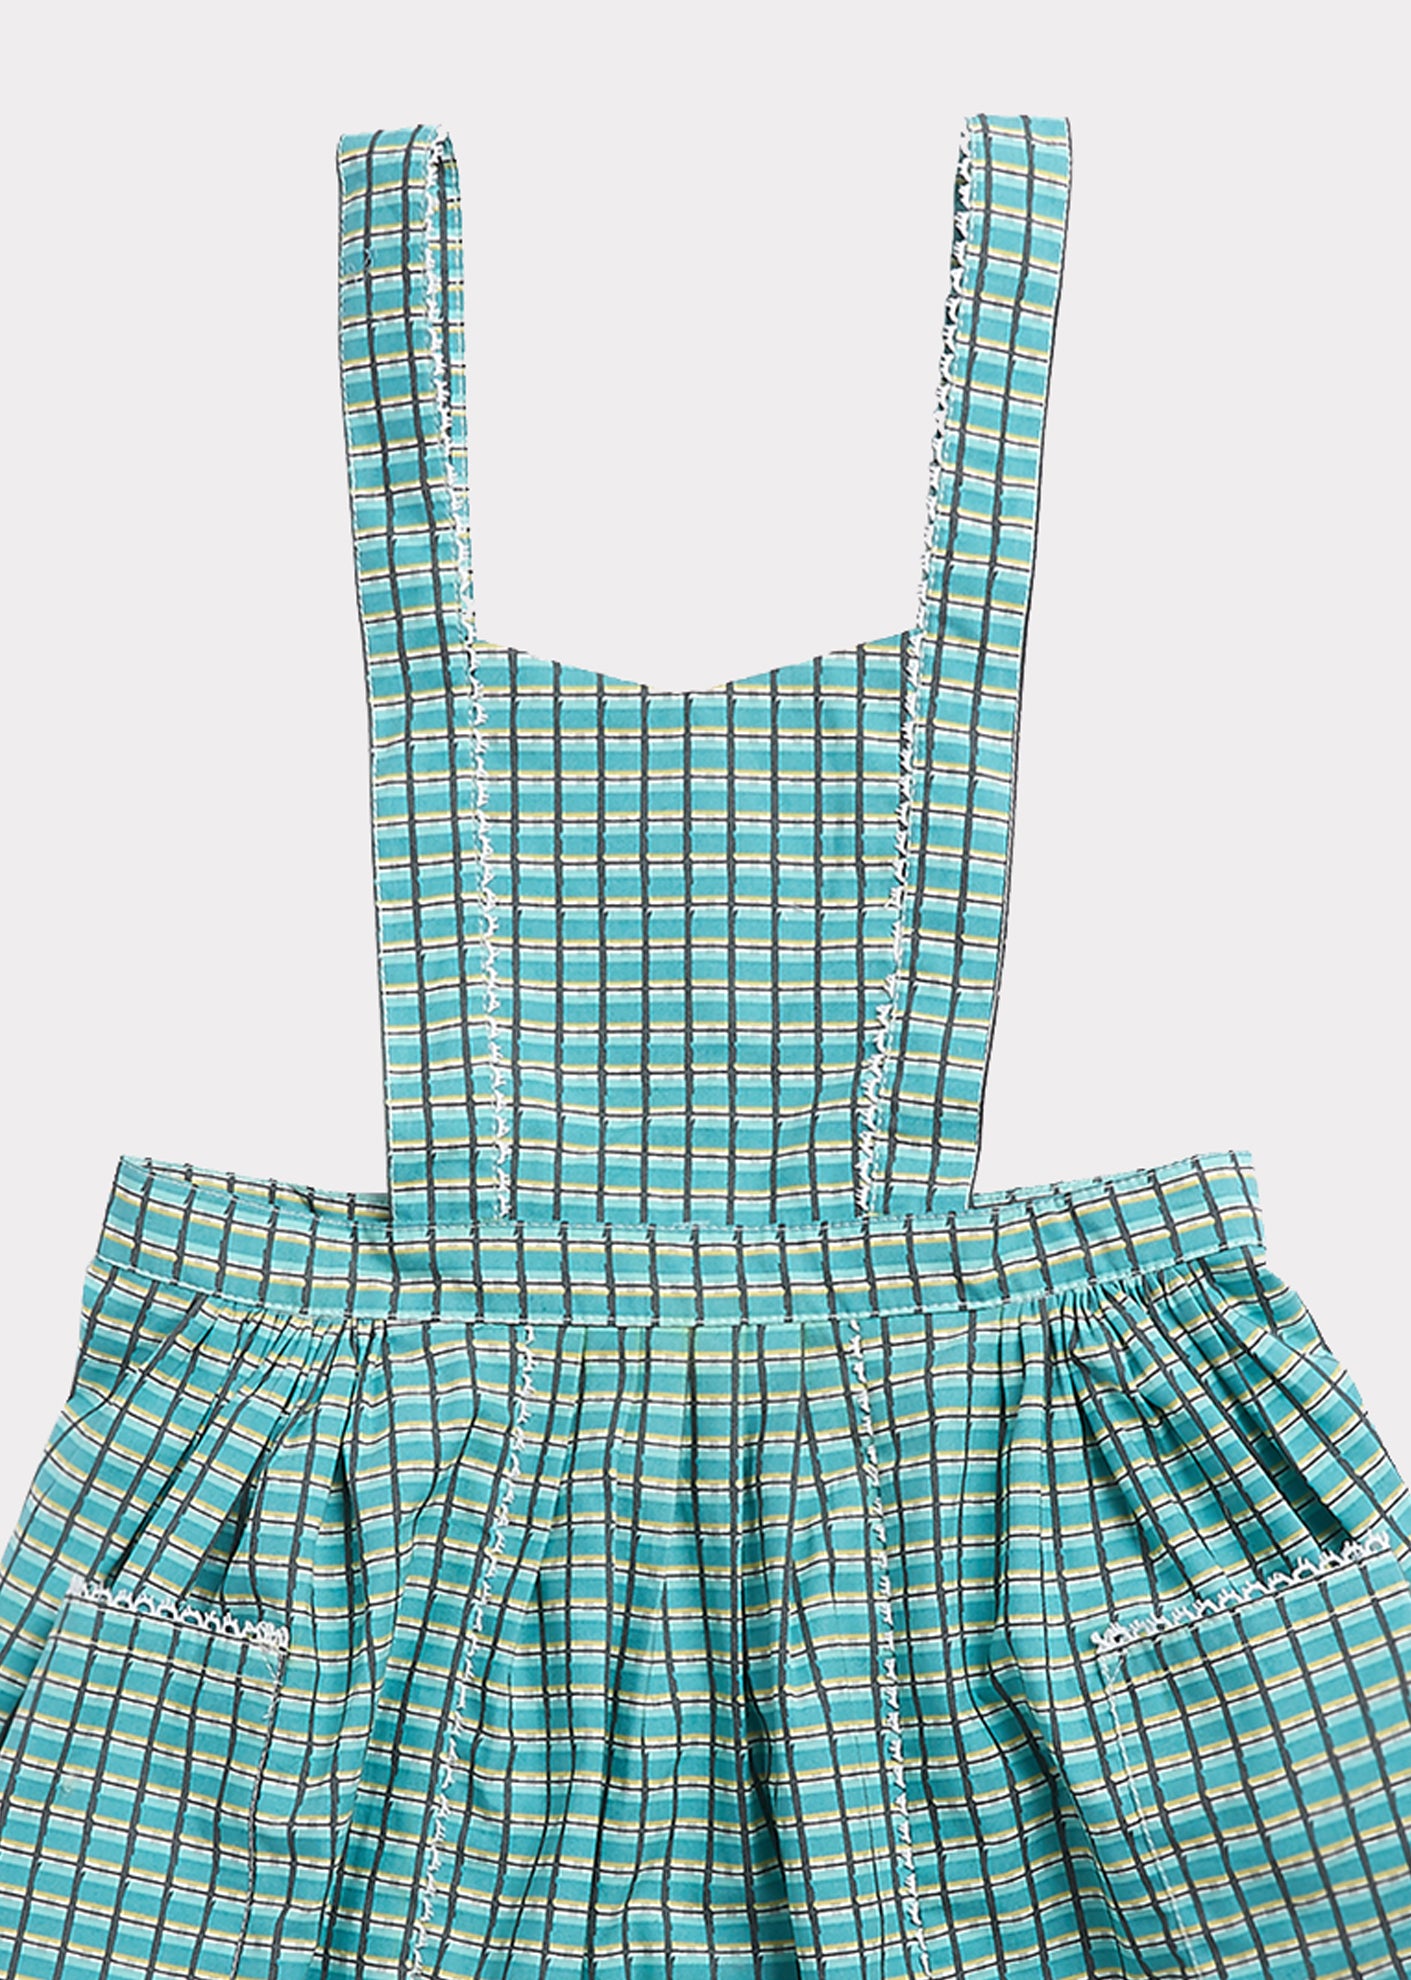 Girls Green Painted Check Cotton Dress